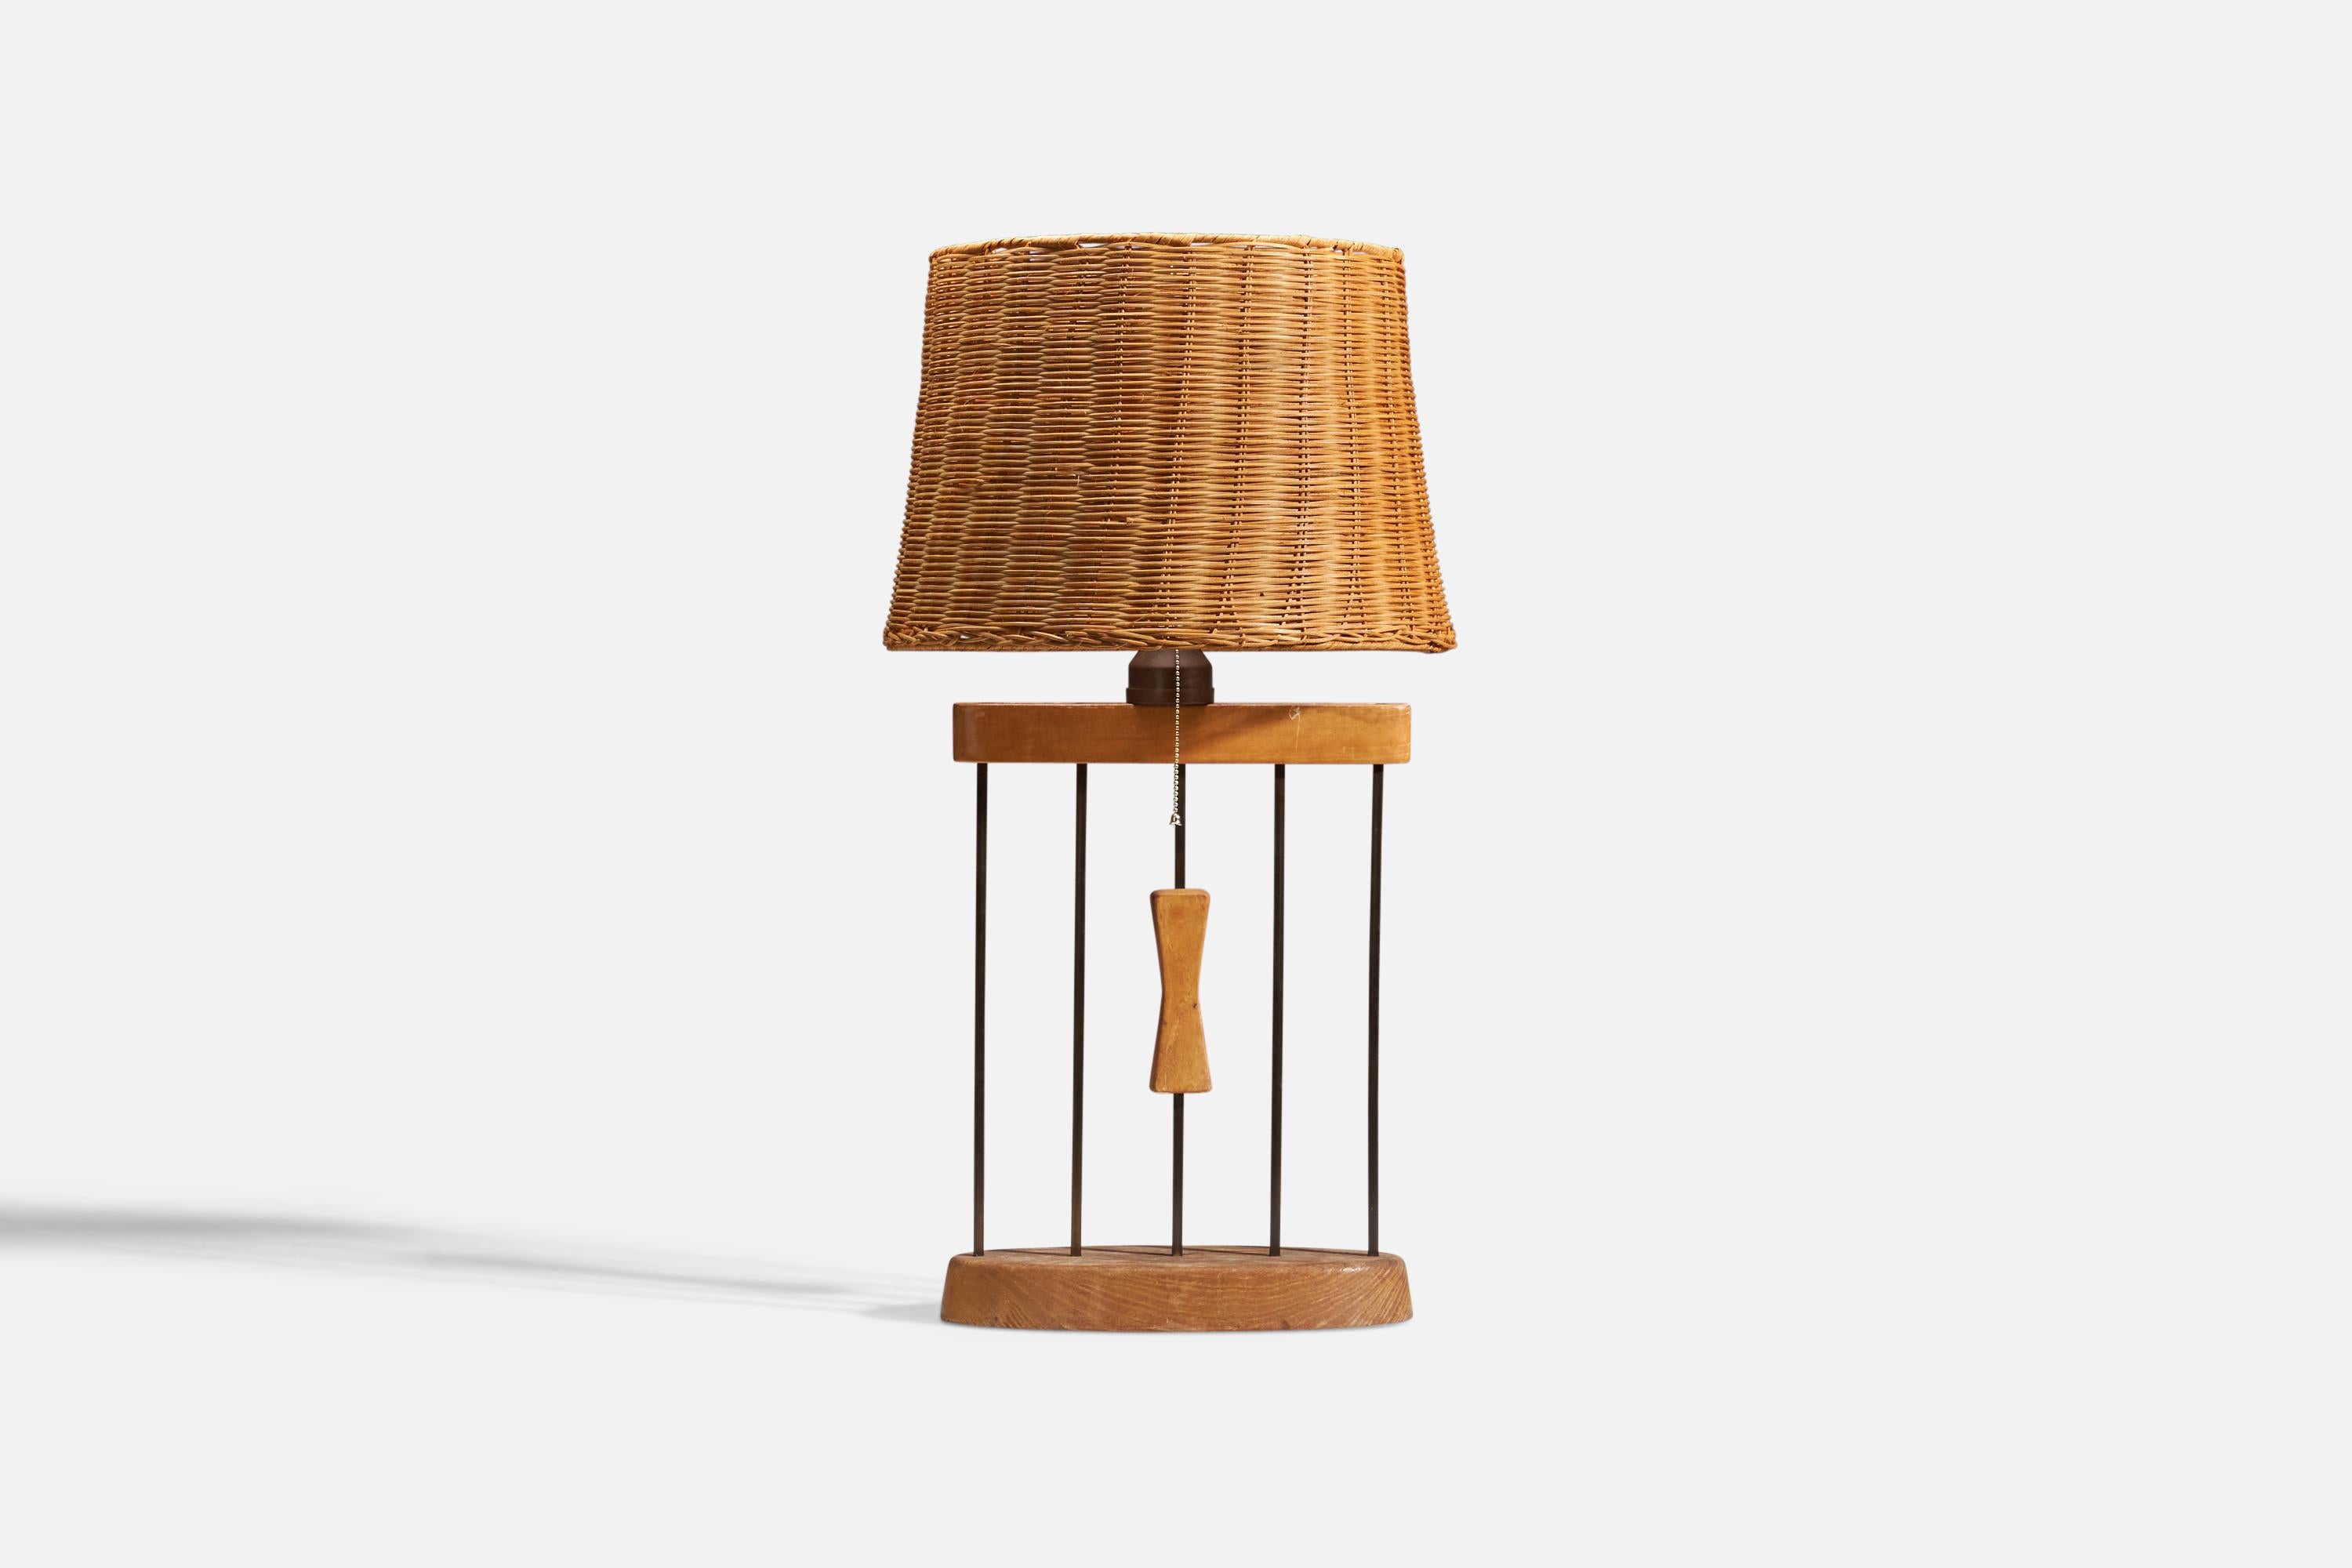 A metal, brass and oak table lamp designed and produced in the United States, 1950s.

Sold with Lampshade
Dimensions of lamp (inches) : 22.31 x 13.75 x 5.81 (height x width x depth)
Dimensions of lampshade (inches) : 13.75 x 16.5 x 11.5 (top